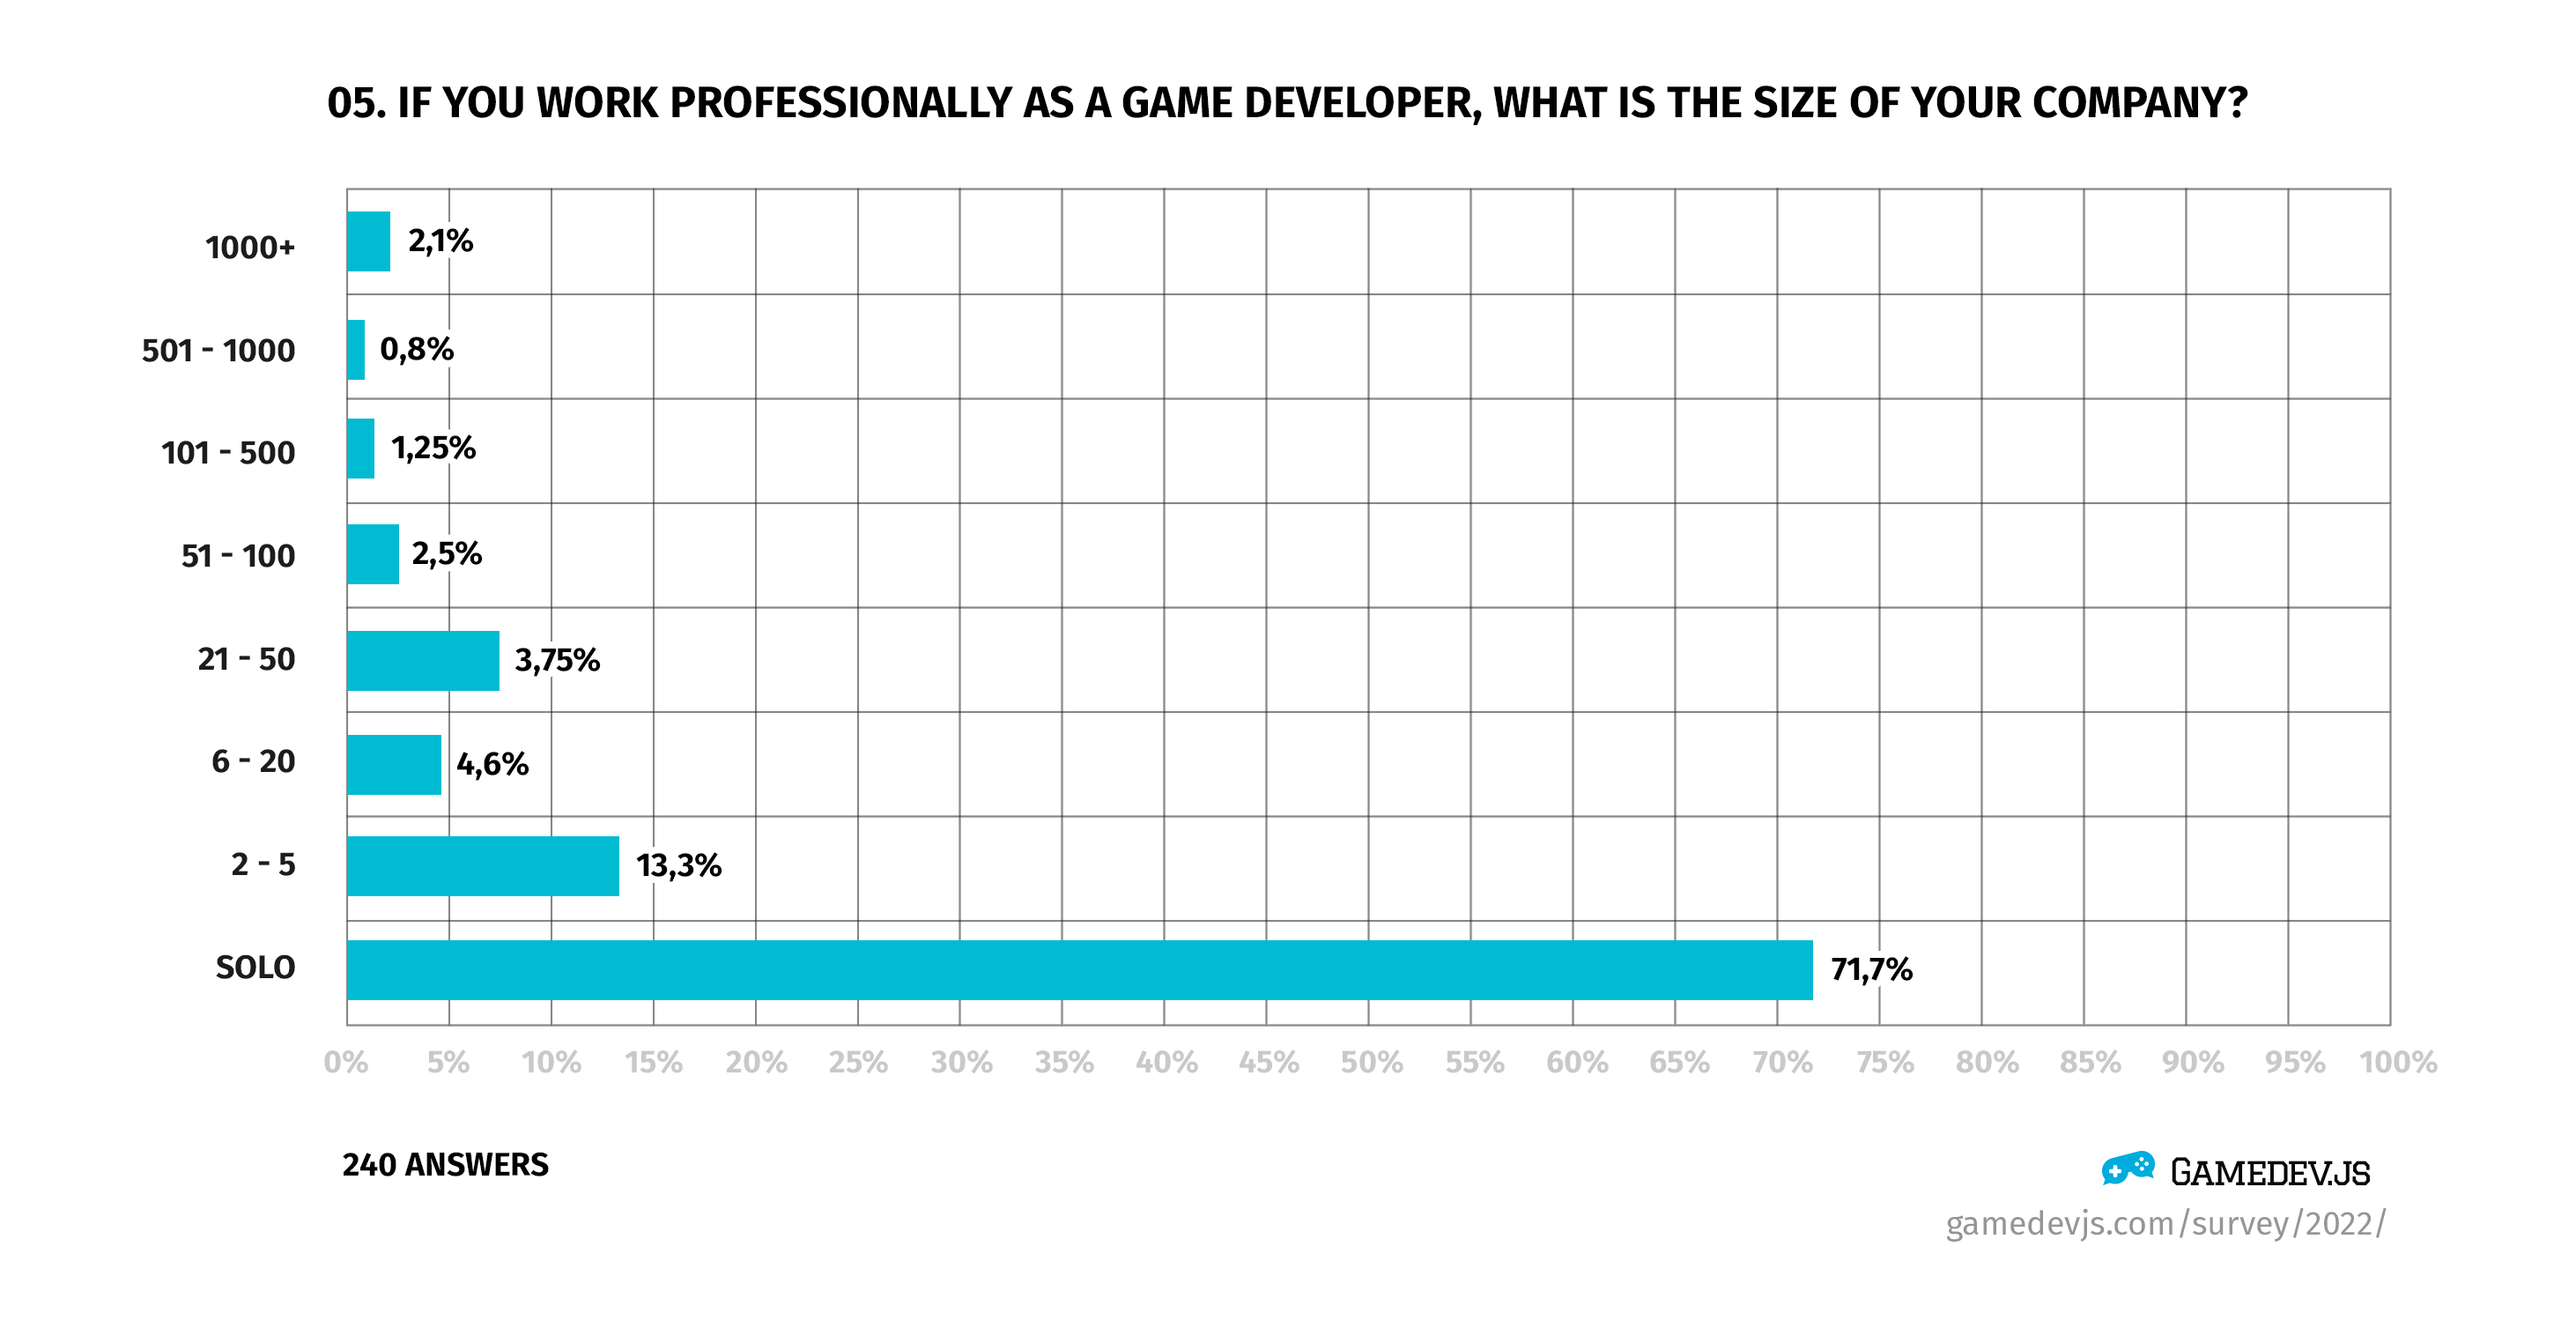 Gamedev.js Survey 2022 - Question #5: If you work professionally as a game developer, what is the size of your company?